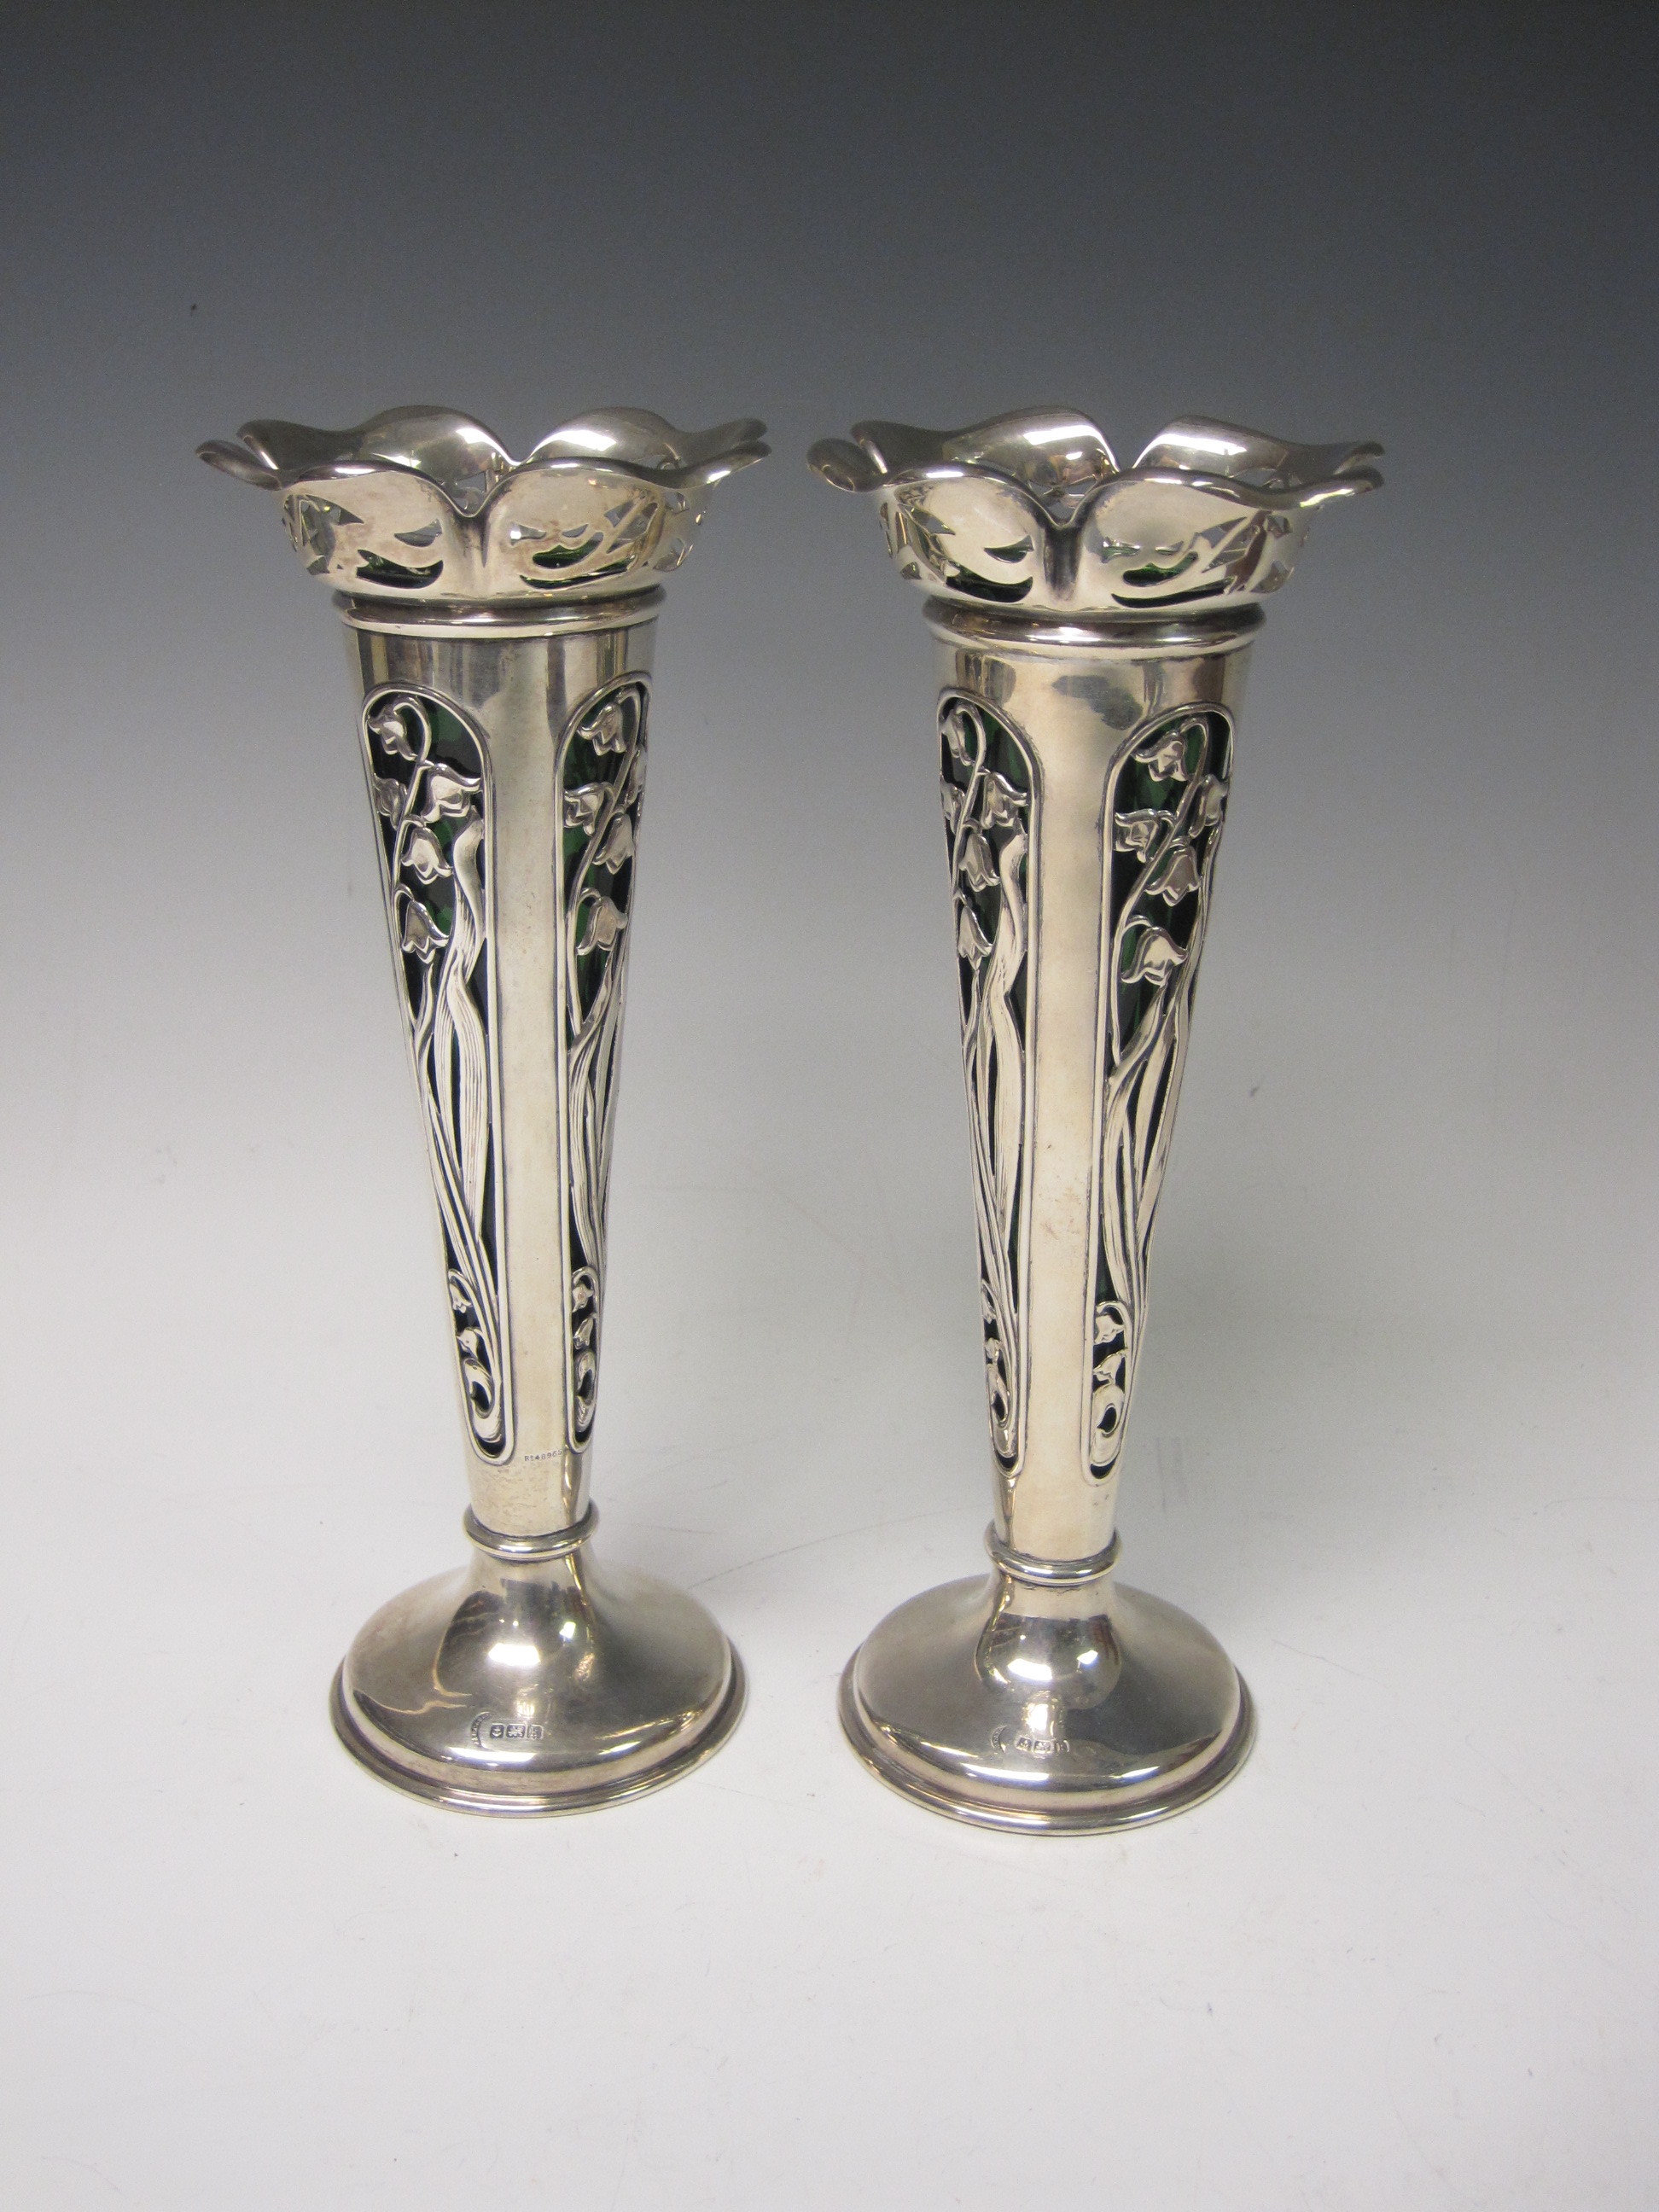 Pair of Edward VII Art Nouveau silver Vases with pierced harebell pattern and green glass liners,